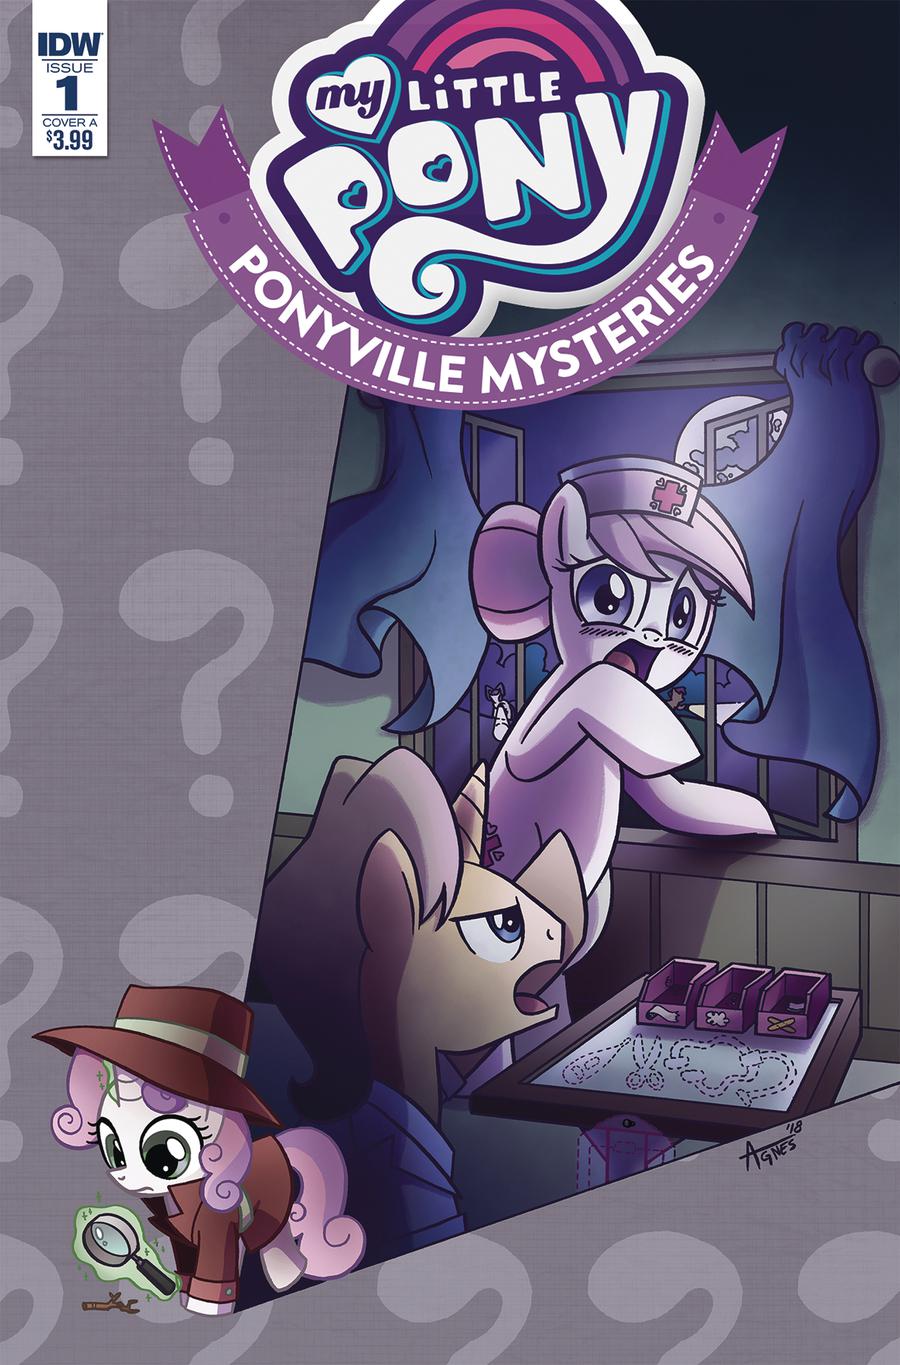 My Little Pony Ponyville Mysteries #1 Cover A Regular Agnes Garbowska Cover